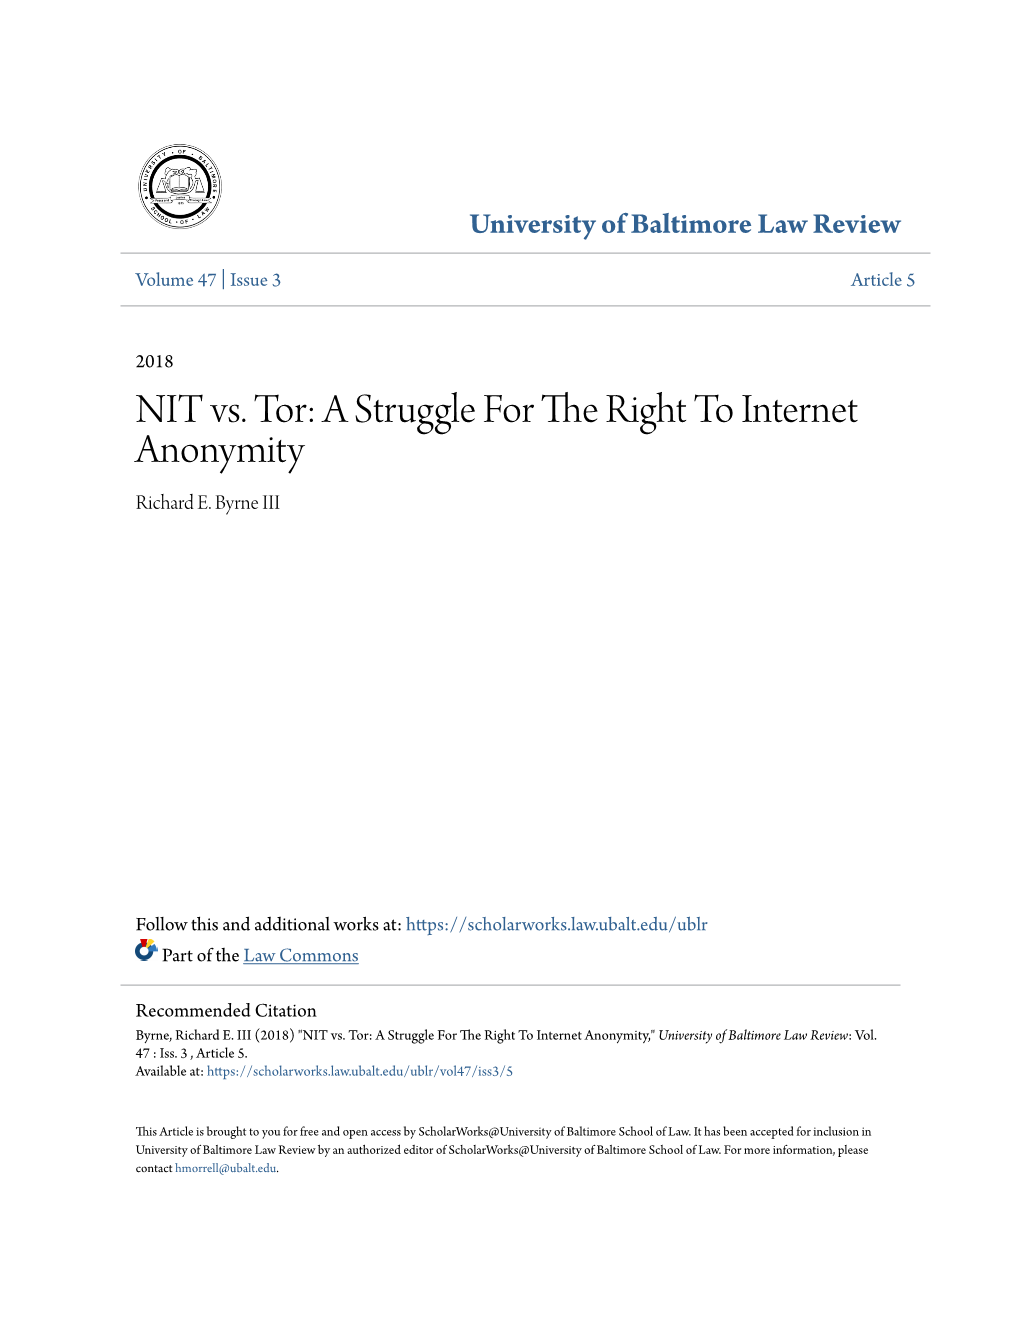 NIT Vs. Tor: a Struggle for the Right to Internet Anonymity Richard E